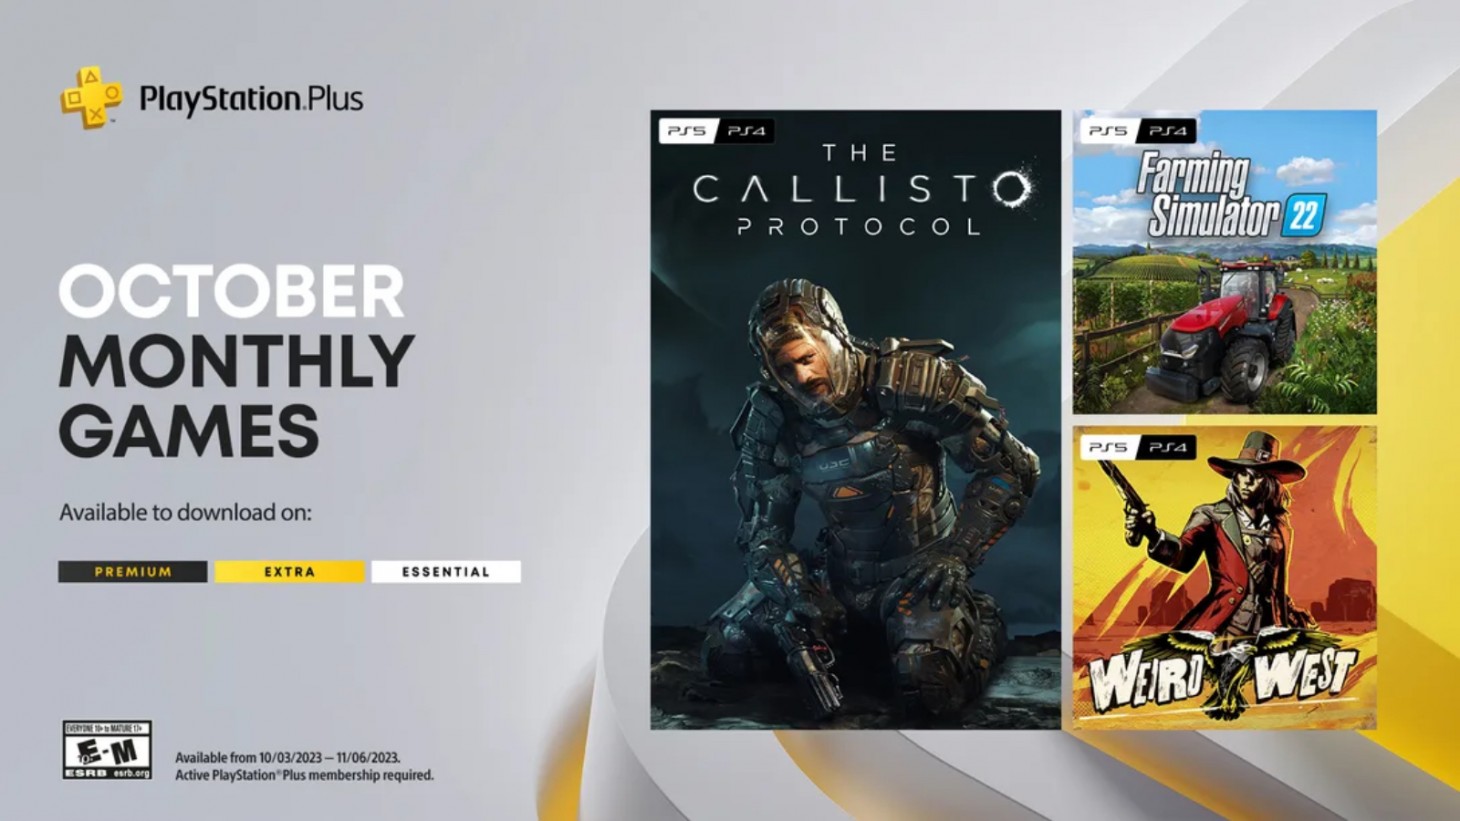 PlayStation Plus: Monthly Games for Oct 2023 Include The Callisto Protocol  and More; Here Is the